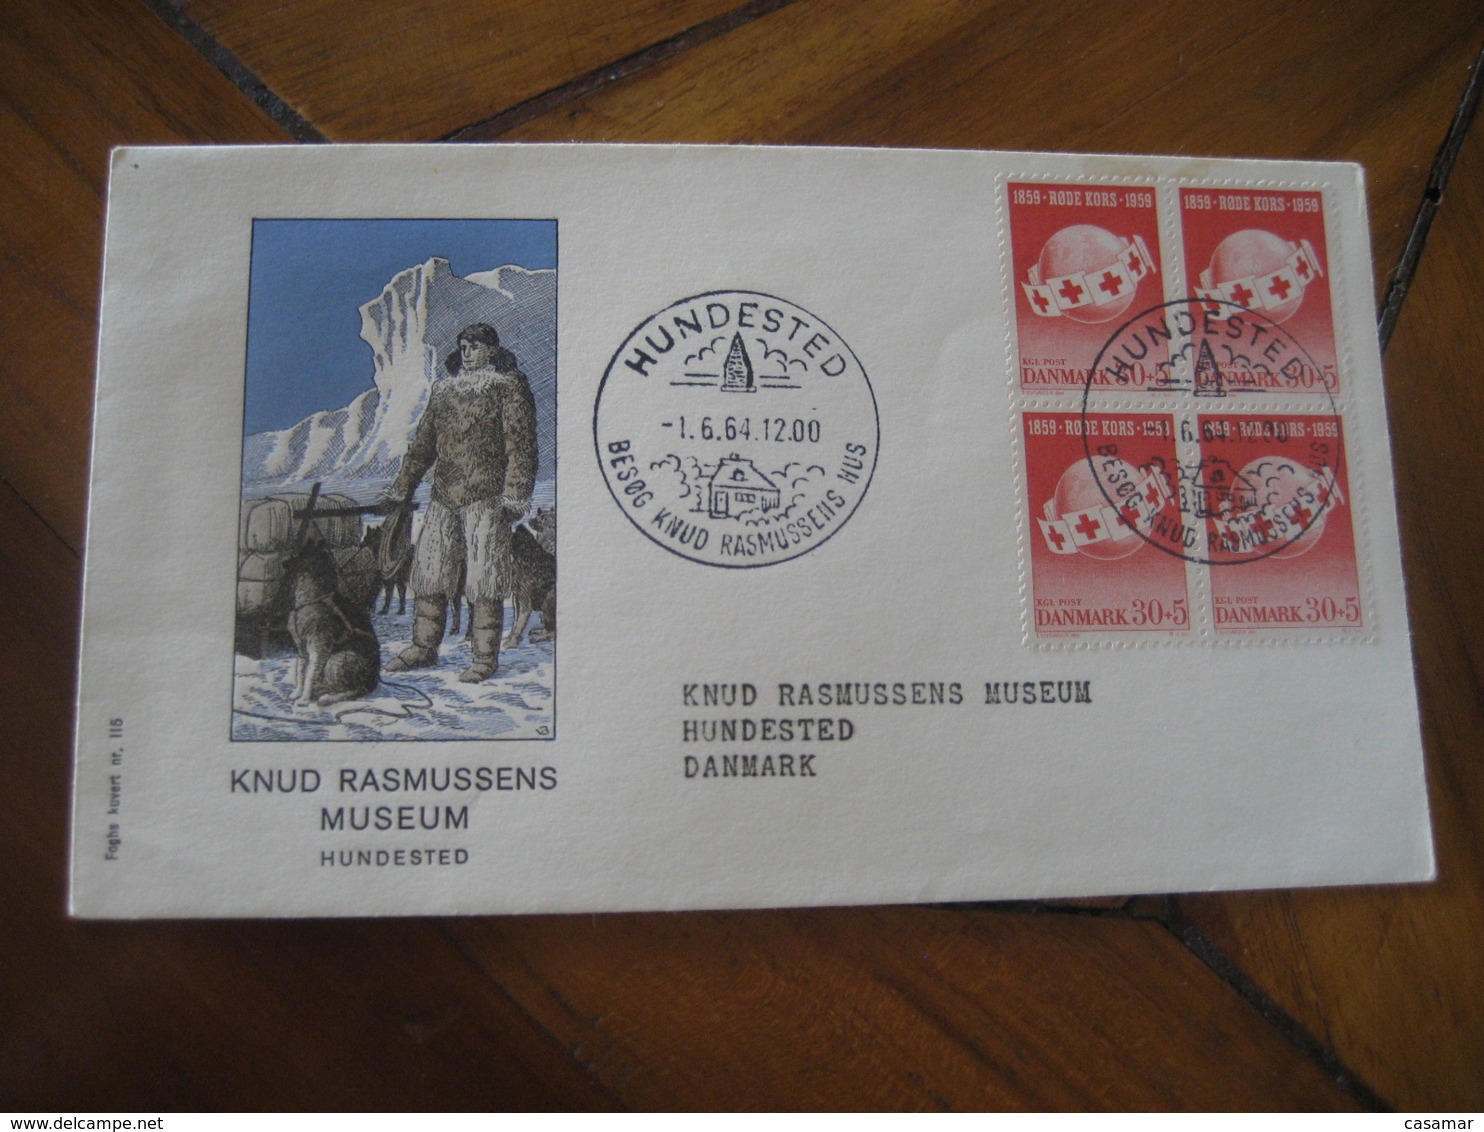 HUNDESTED 1964 Rasmussens Dog Sleigh Red Cross Croix Rouge 4 Stamp Cancel Cover DENMARK - Lettres & Documents